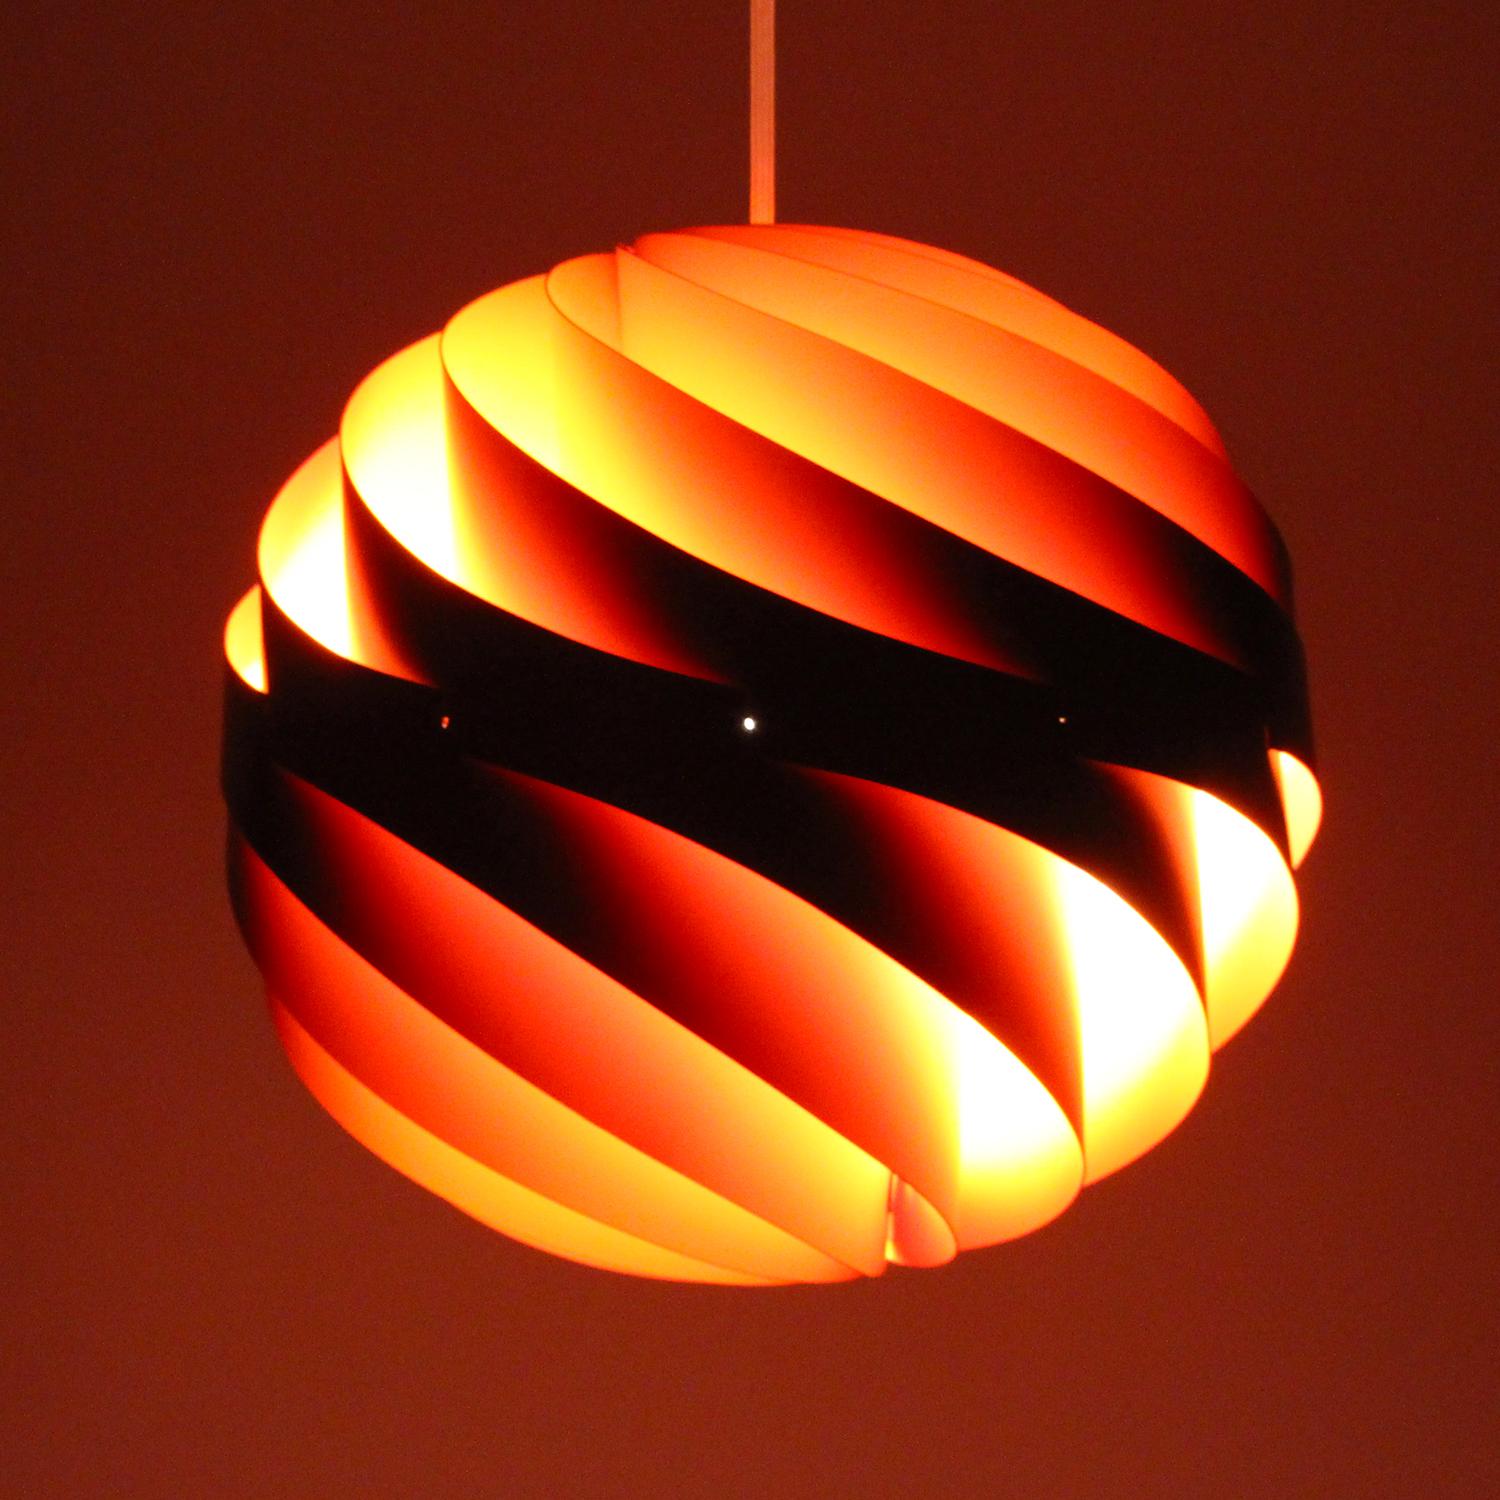 Turbo I - rare orange pendant by Louis Weisdorf in 1965 and produced by Lyfa from 1967 - extremely rare vintage and super attractive Danish midcentury design masterpiece!

12 thin aluminium lamellae elegantly spiral twisted and intertwined to form